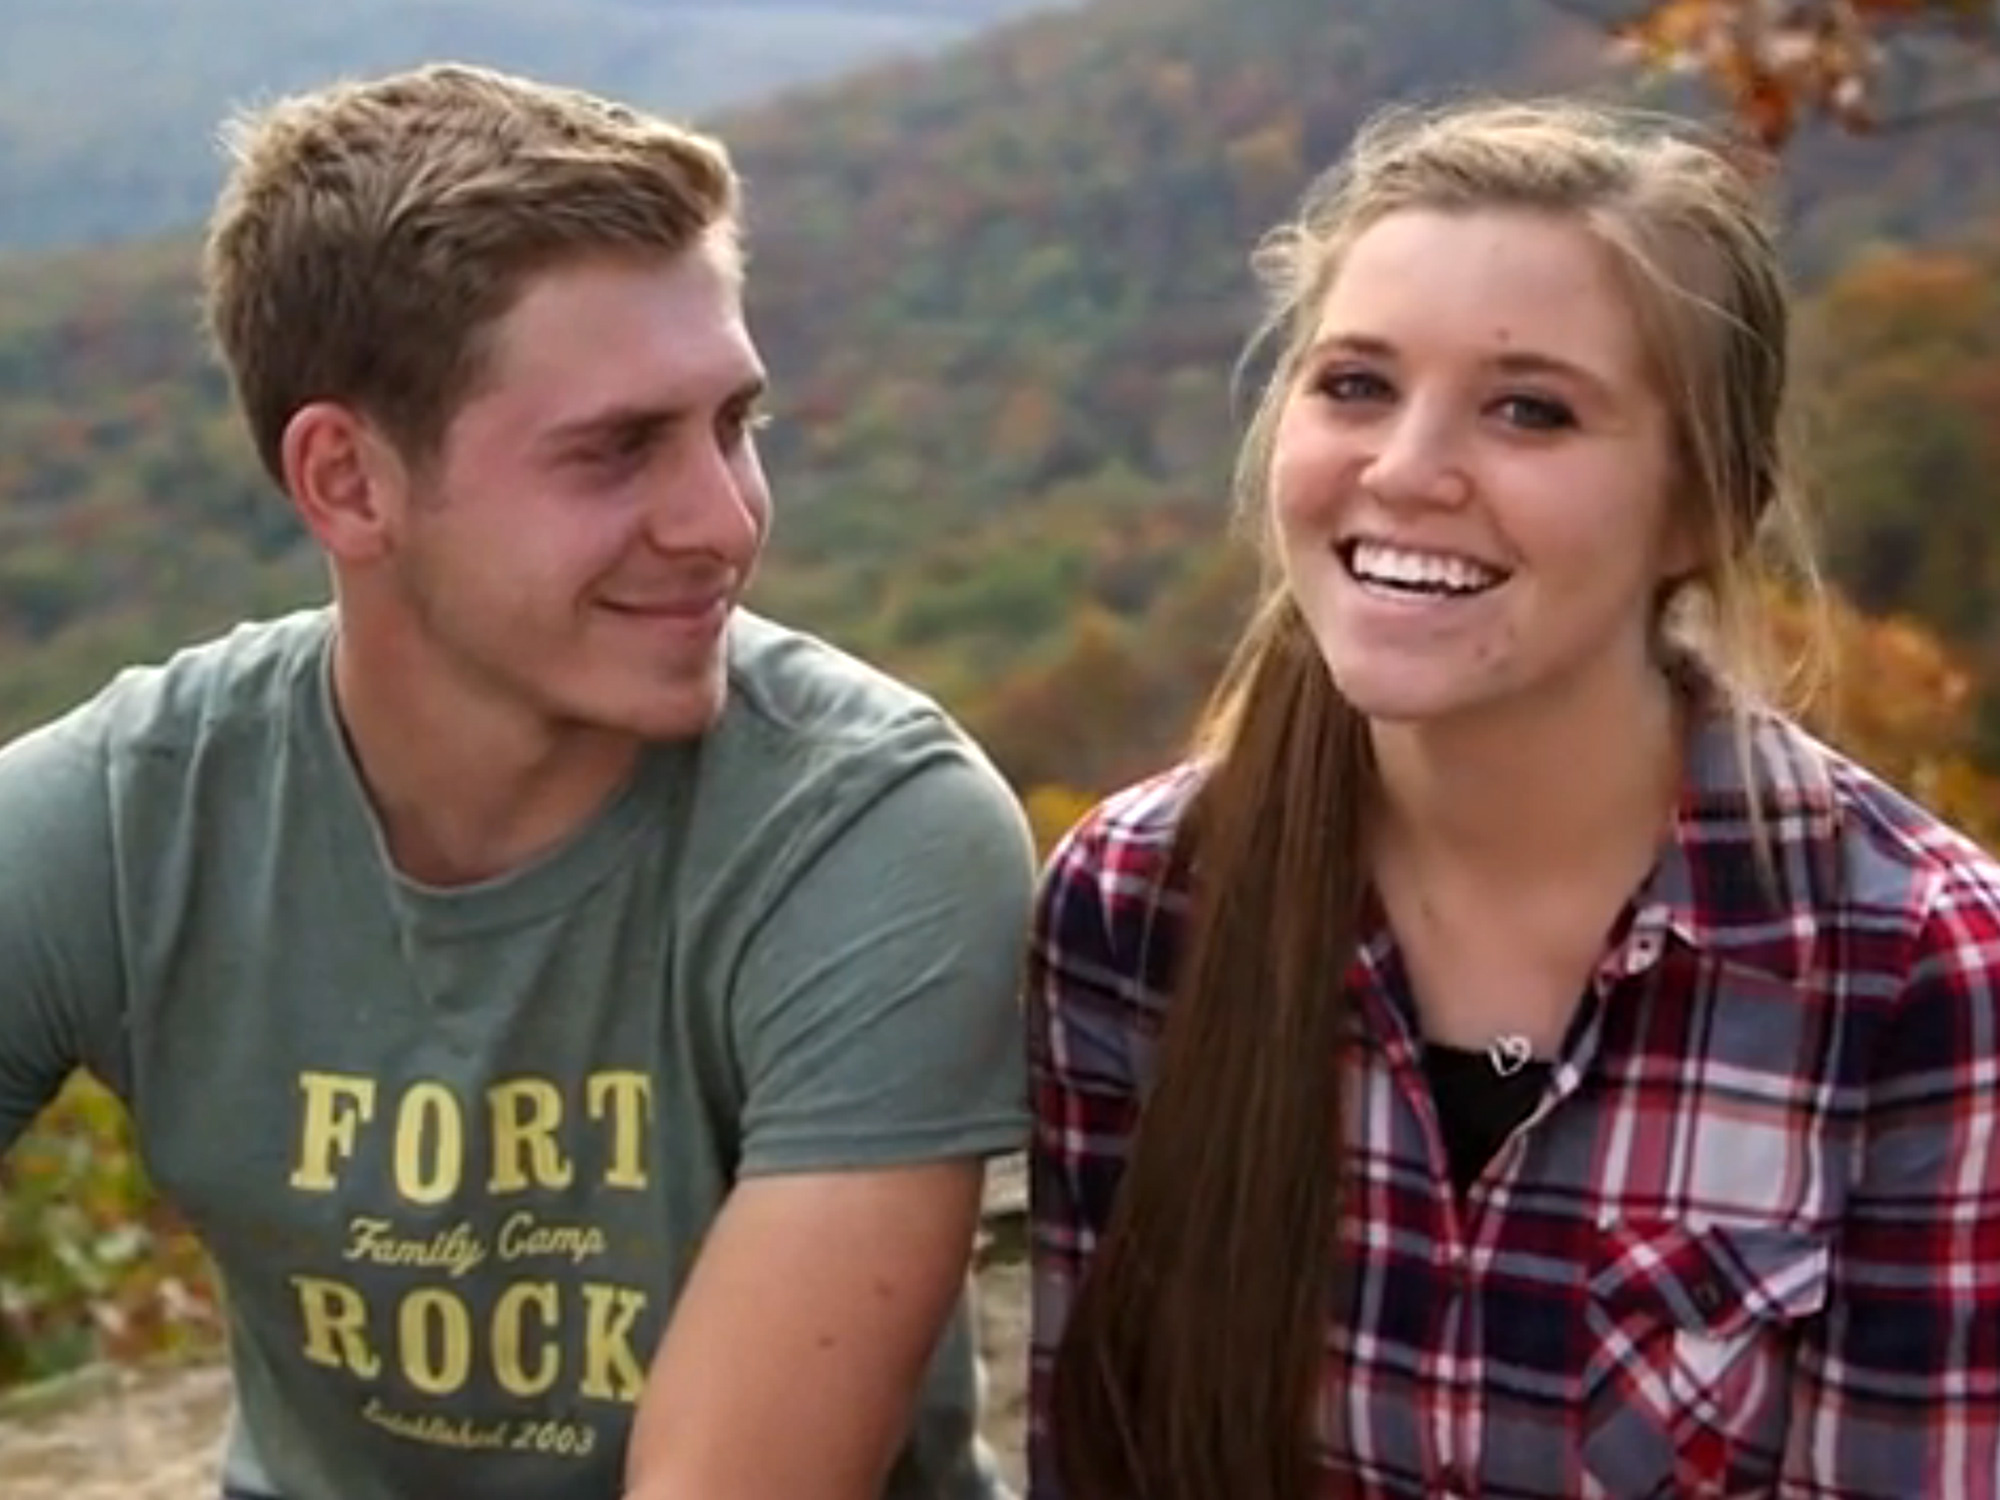 Another Duggar daughter has found herself in an intimate relationship. Joy-Anna Duggar is presently in a courtship with Austin, a longtime friend for the past 15 years.